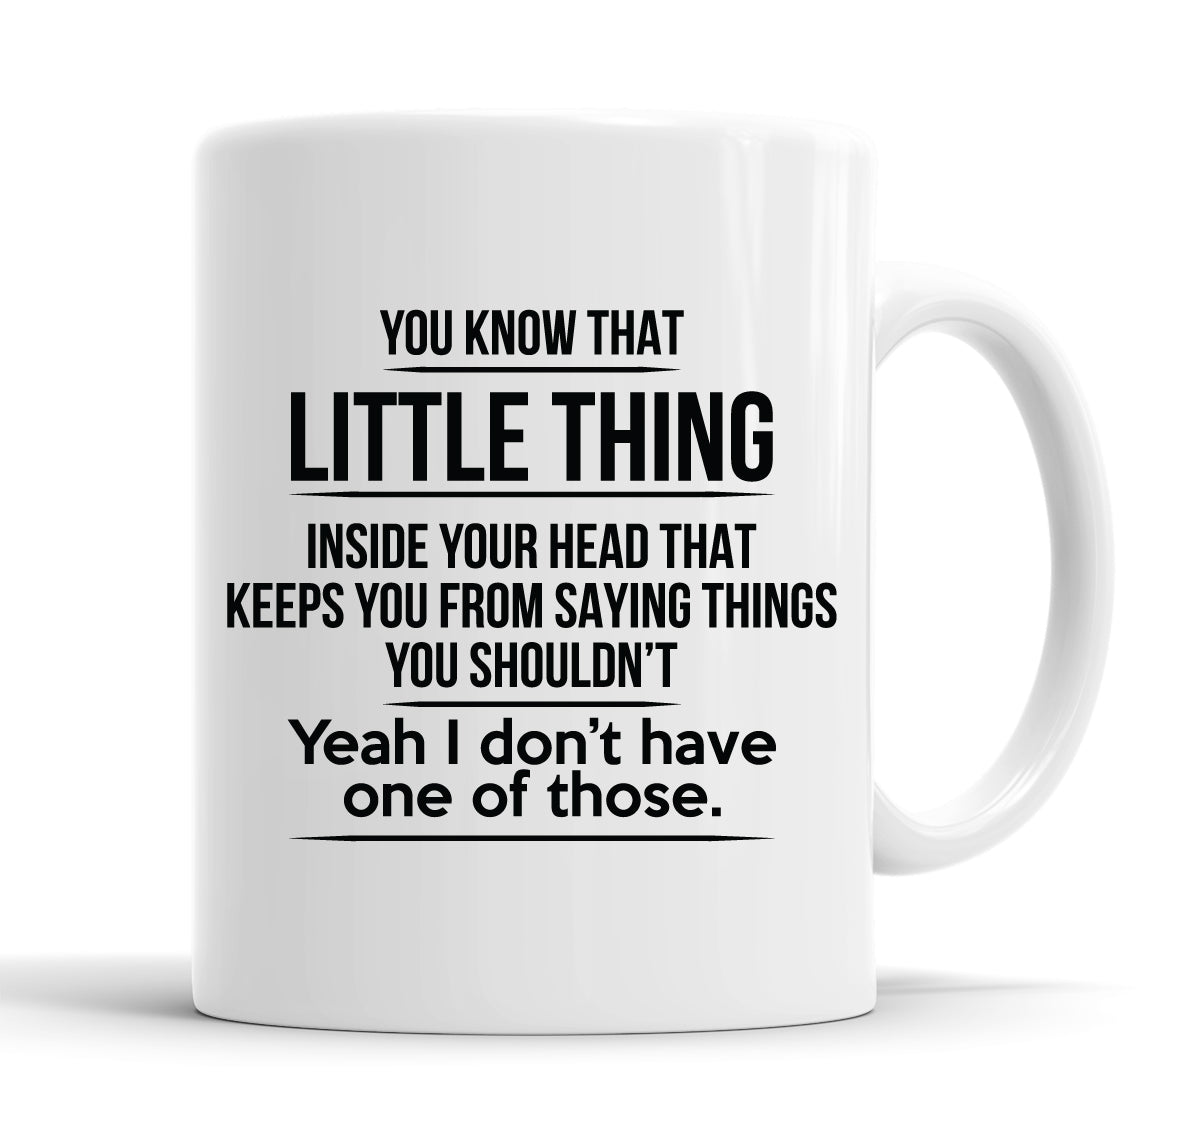 That Little Thing Inside Your Head That Keeps You From Saying Things You Shouldn't Funny Slogan Mug Tea Cup Coffee